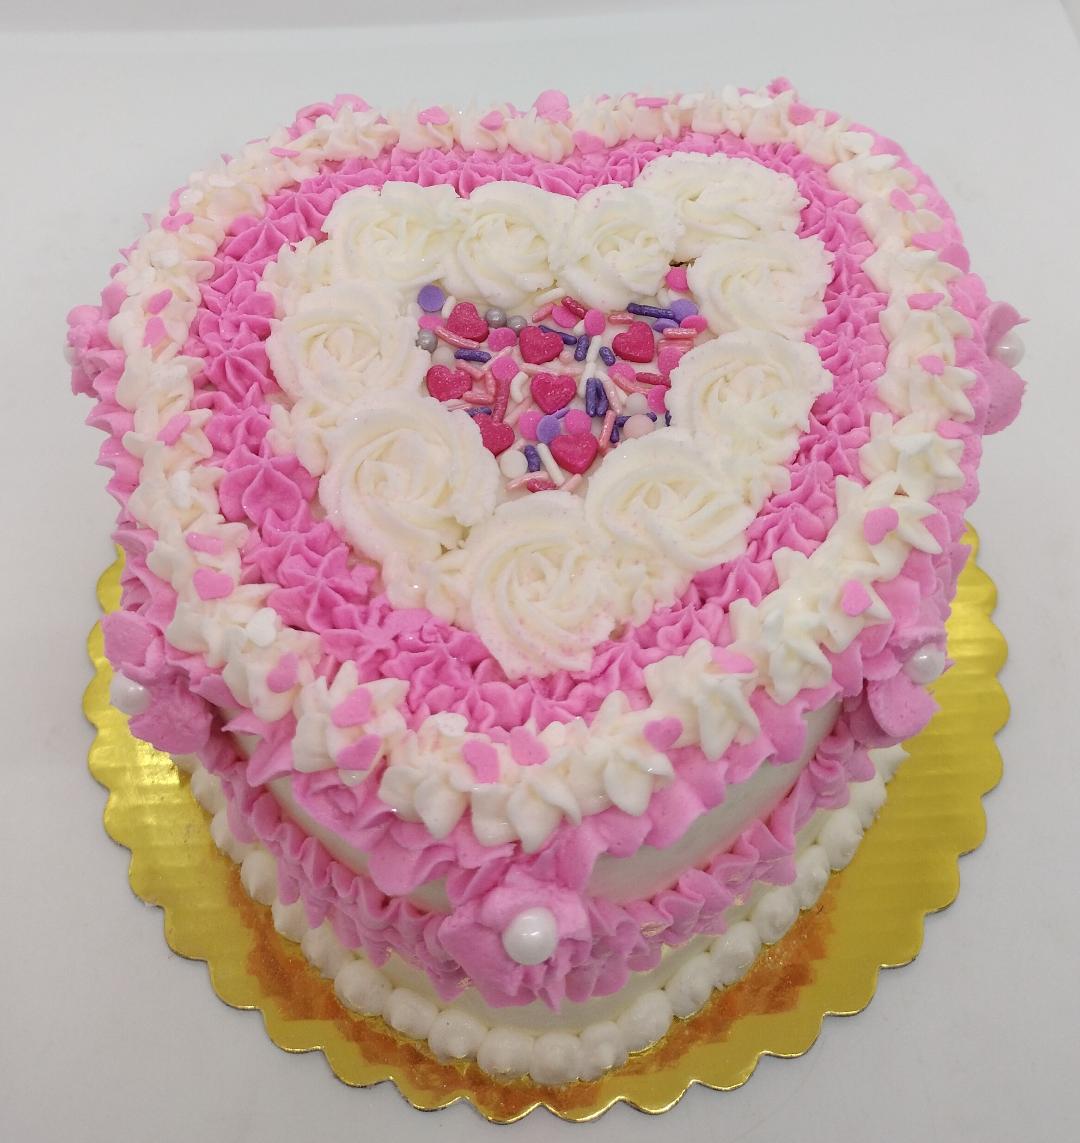 6" 3-layer Decorated Heart Shaped Cake (local delivery or pick-up only)